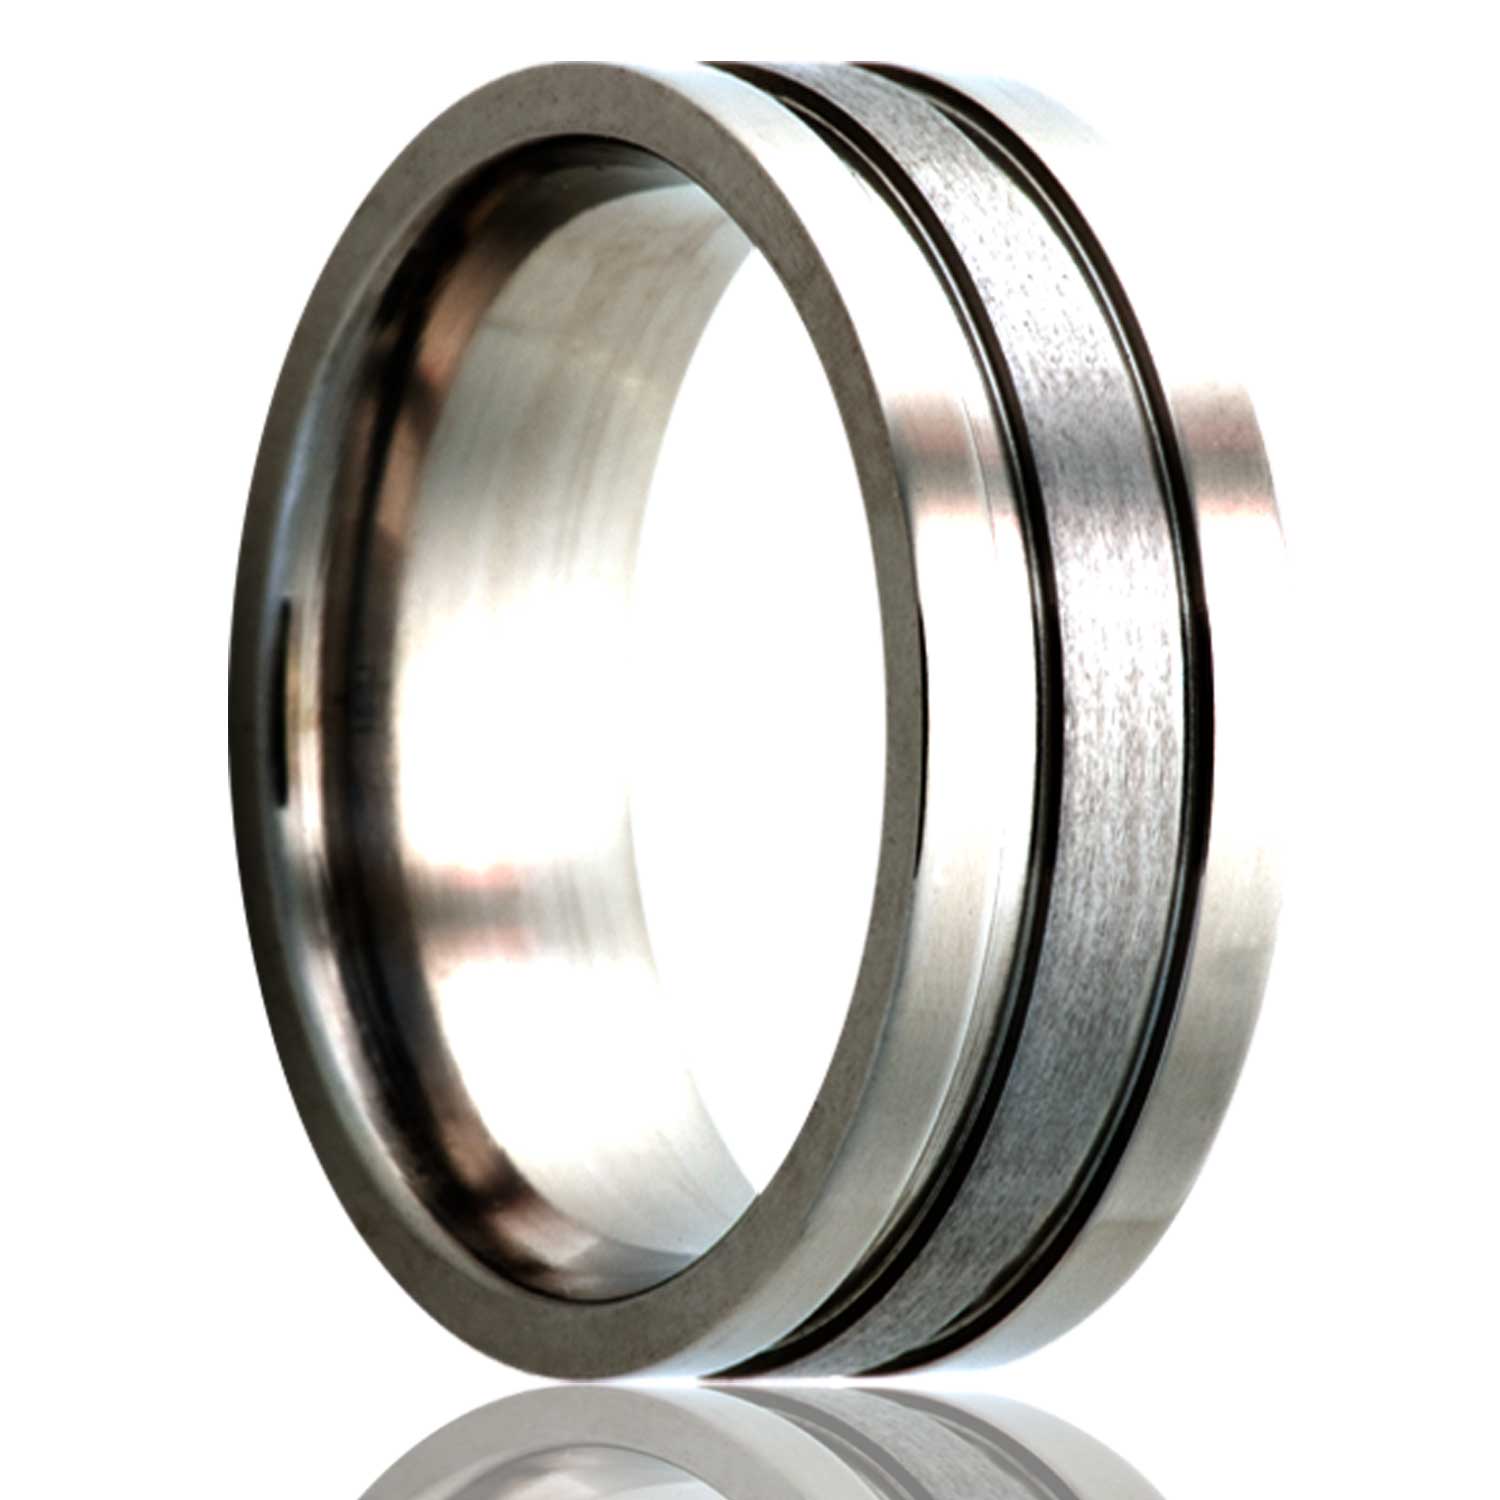 A satin finish grooved titanium wedding band displayed on a neutral white background.